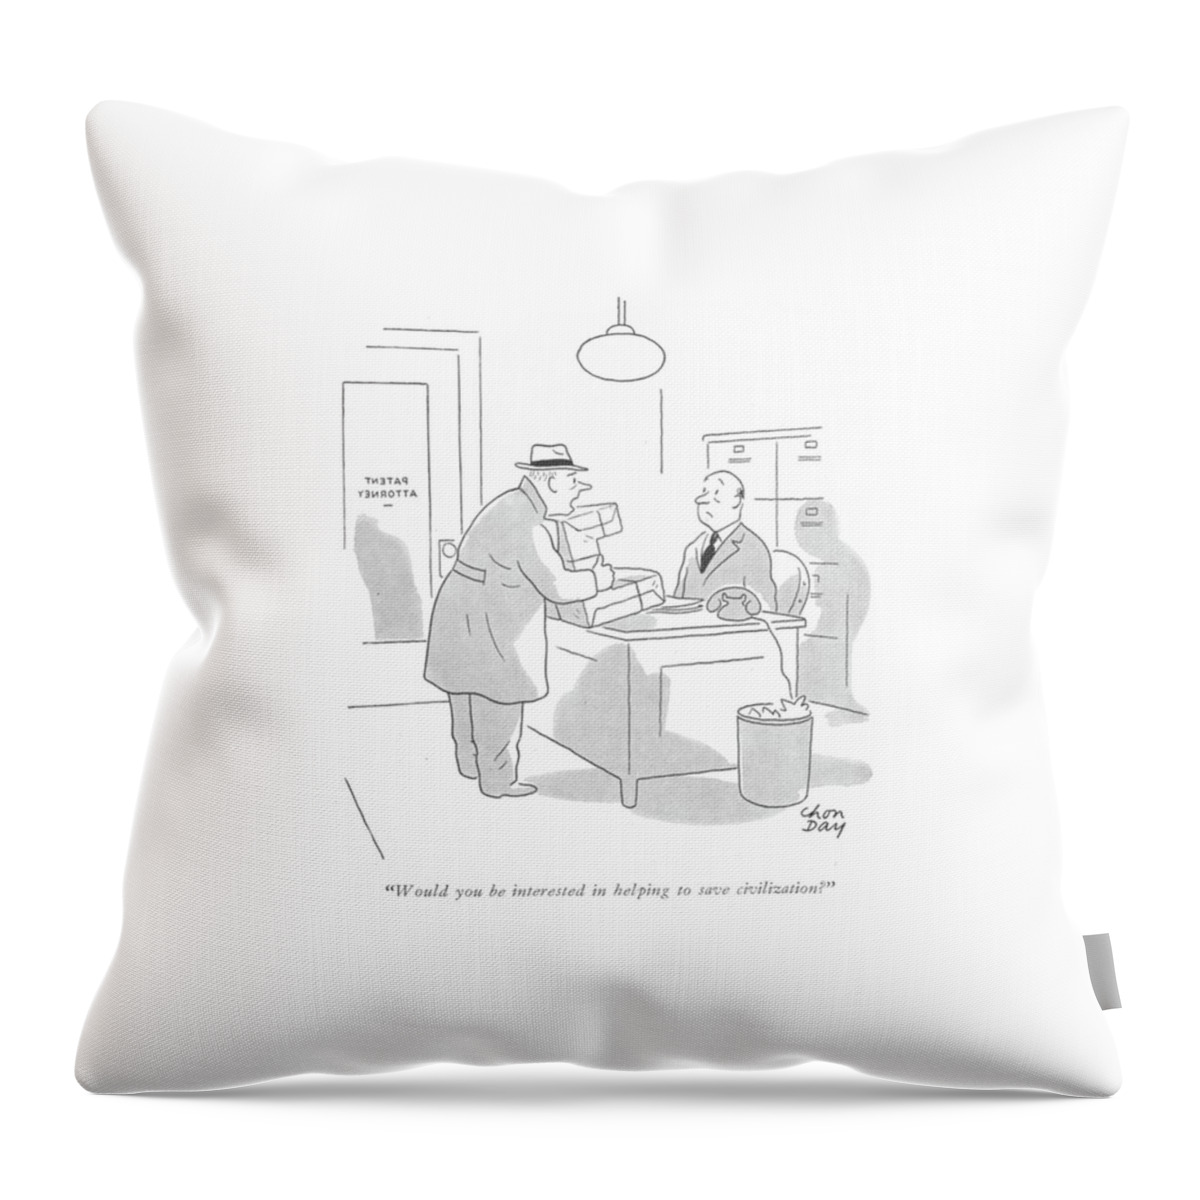 Would You Be Interested In Helping To Save Throw Pillow